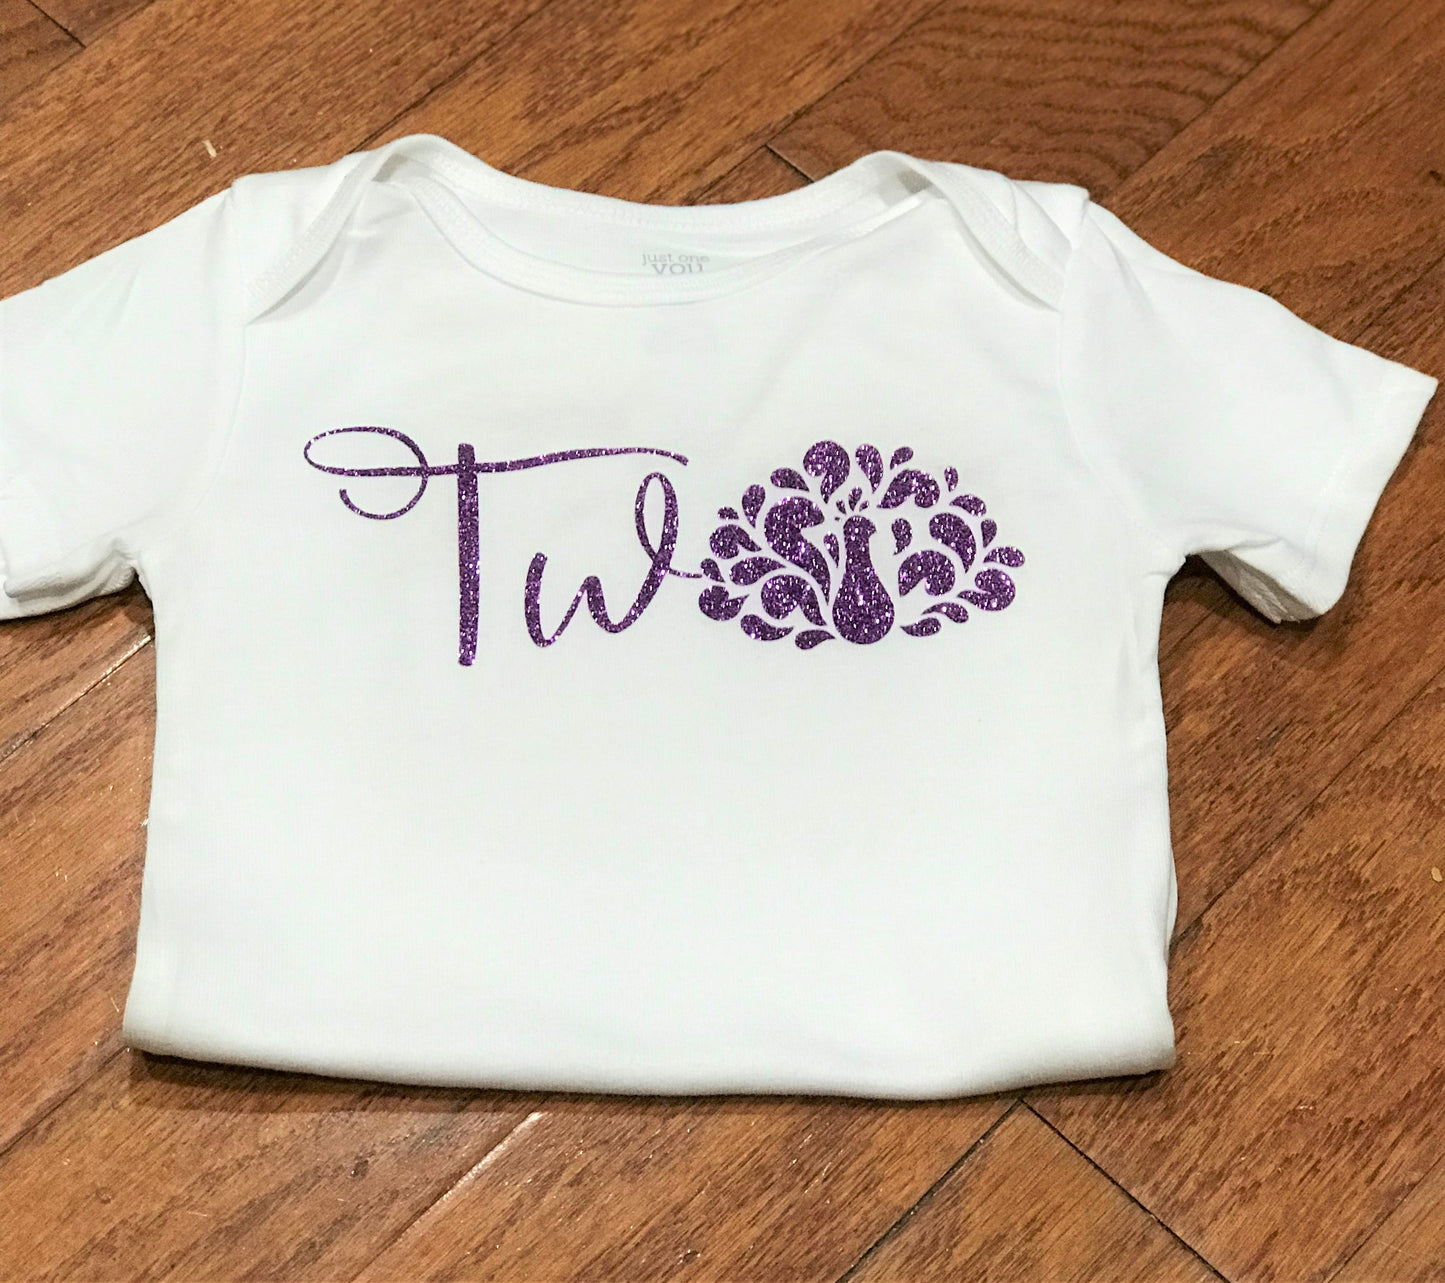 Handcrafted Children's Clothing, Clothing for Children and Parents, Two Peacock Birthday Shirt, chi-fashionista